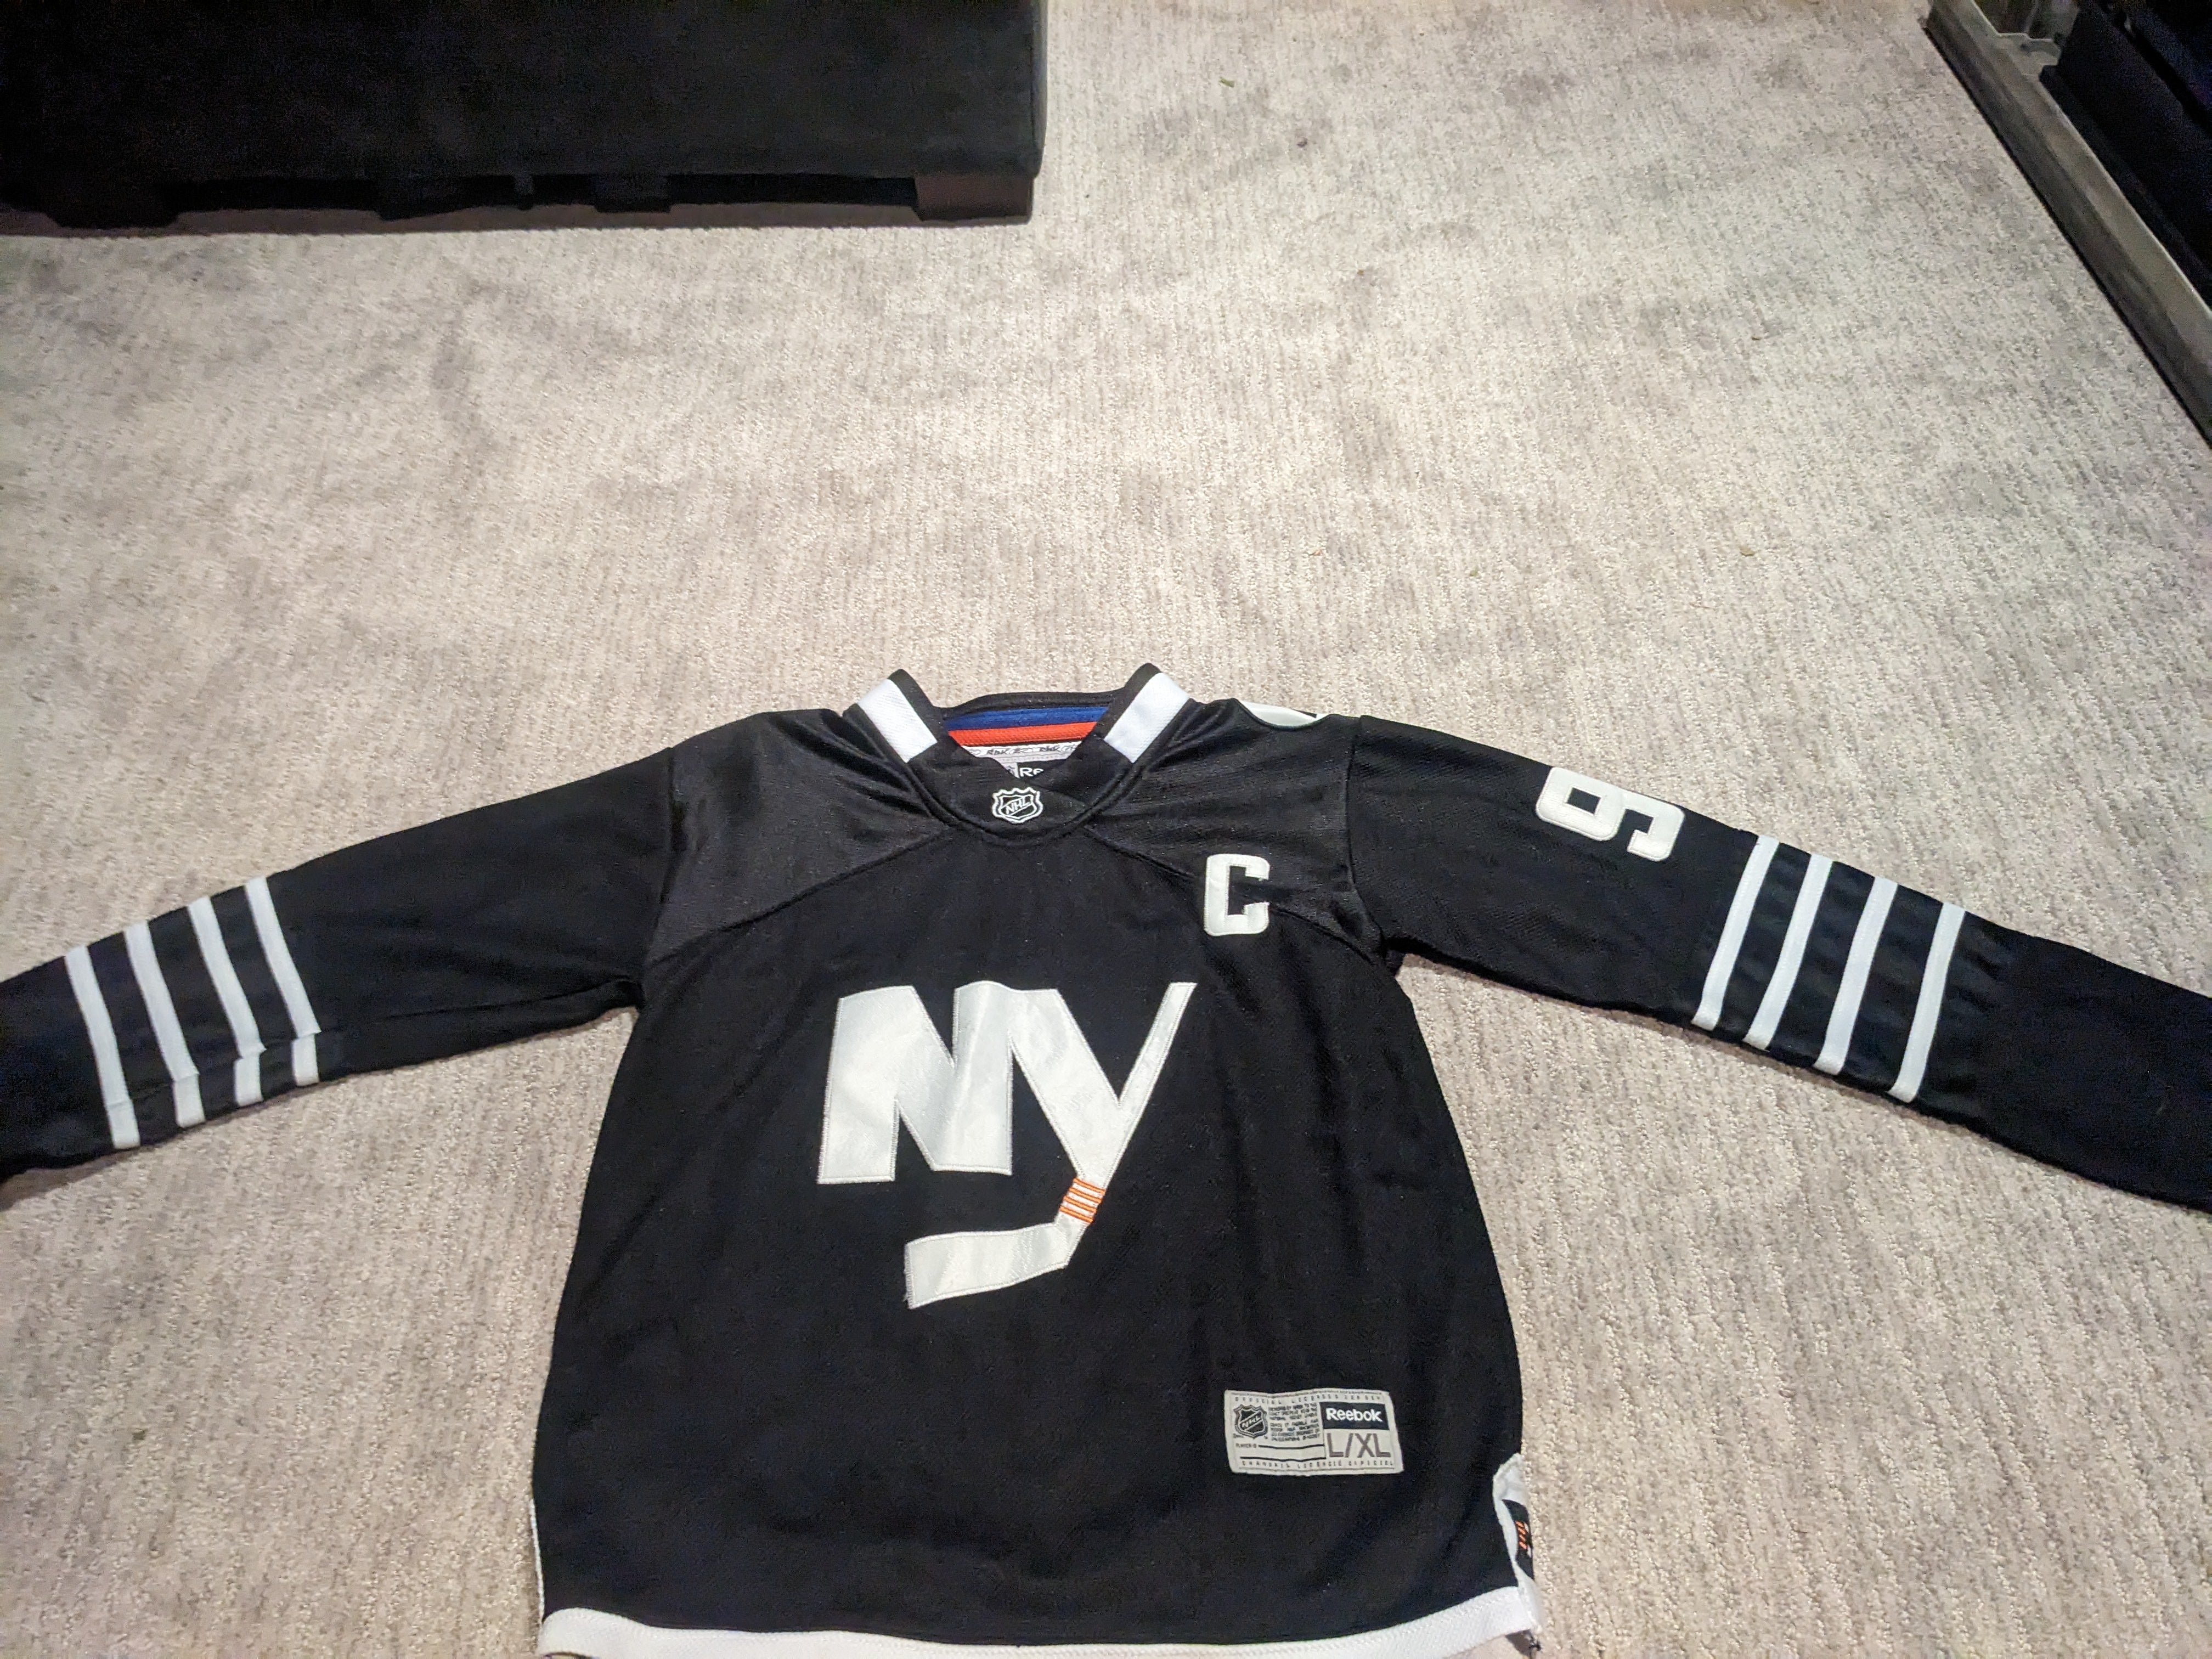 Is this the New York Islanders' new black 3rd jersey?